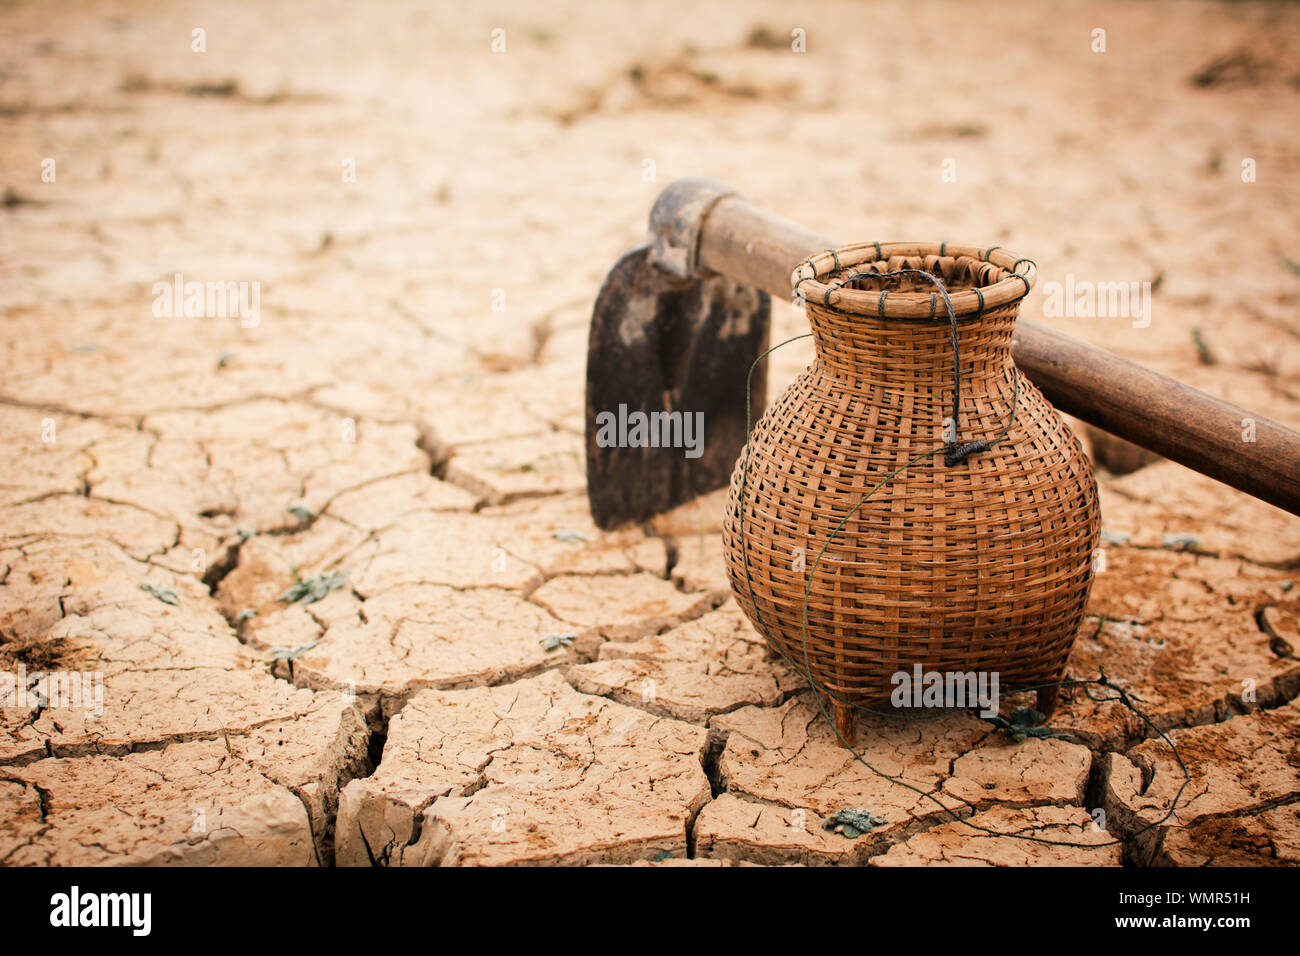 Close-up Of Garden Hoe And Basket On Barren Land Stock Photo